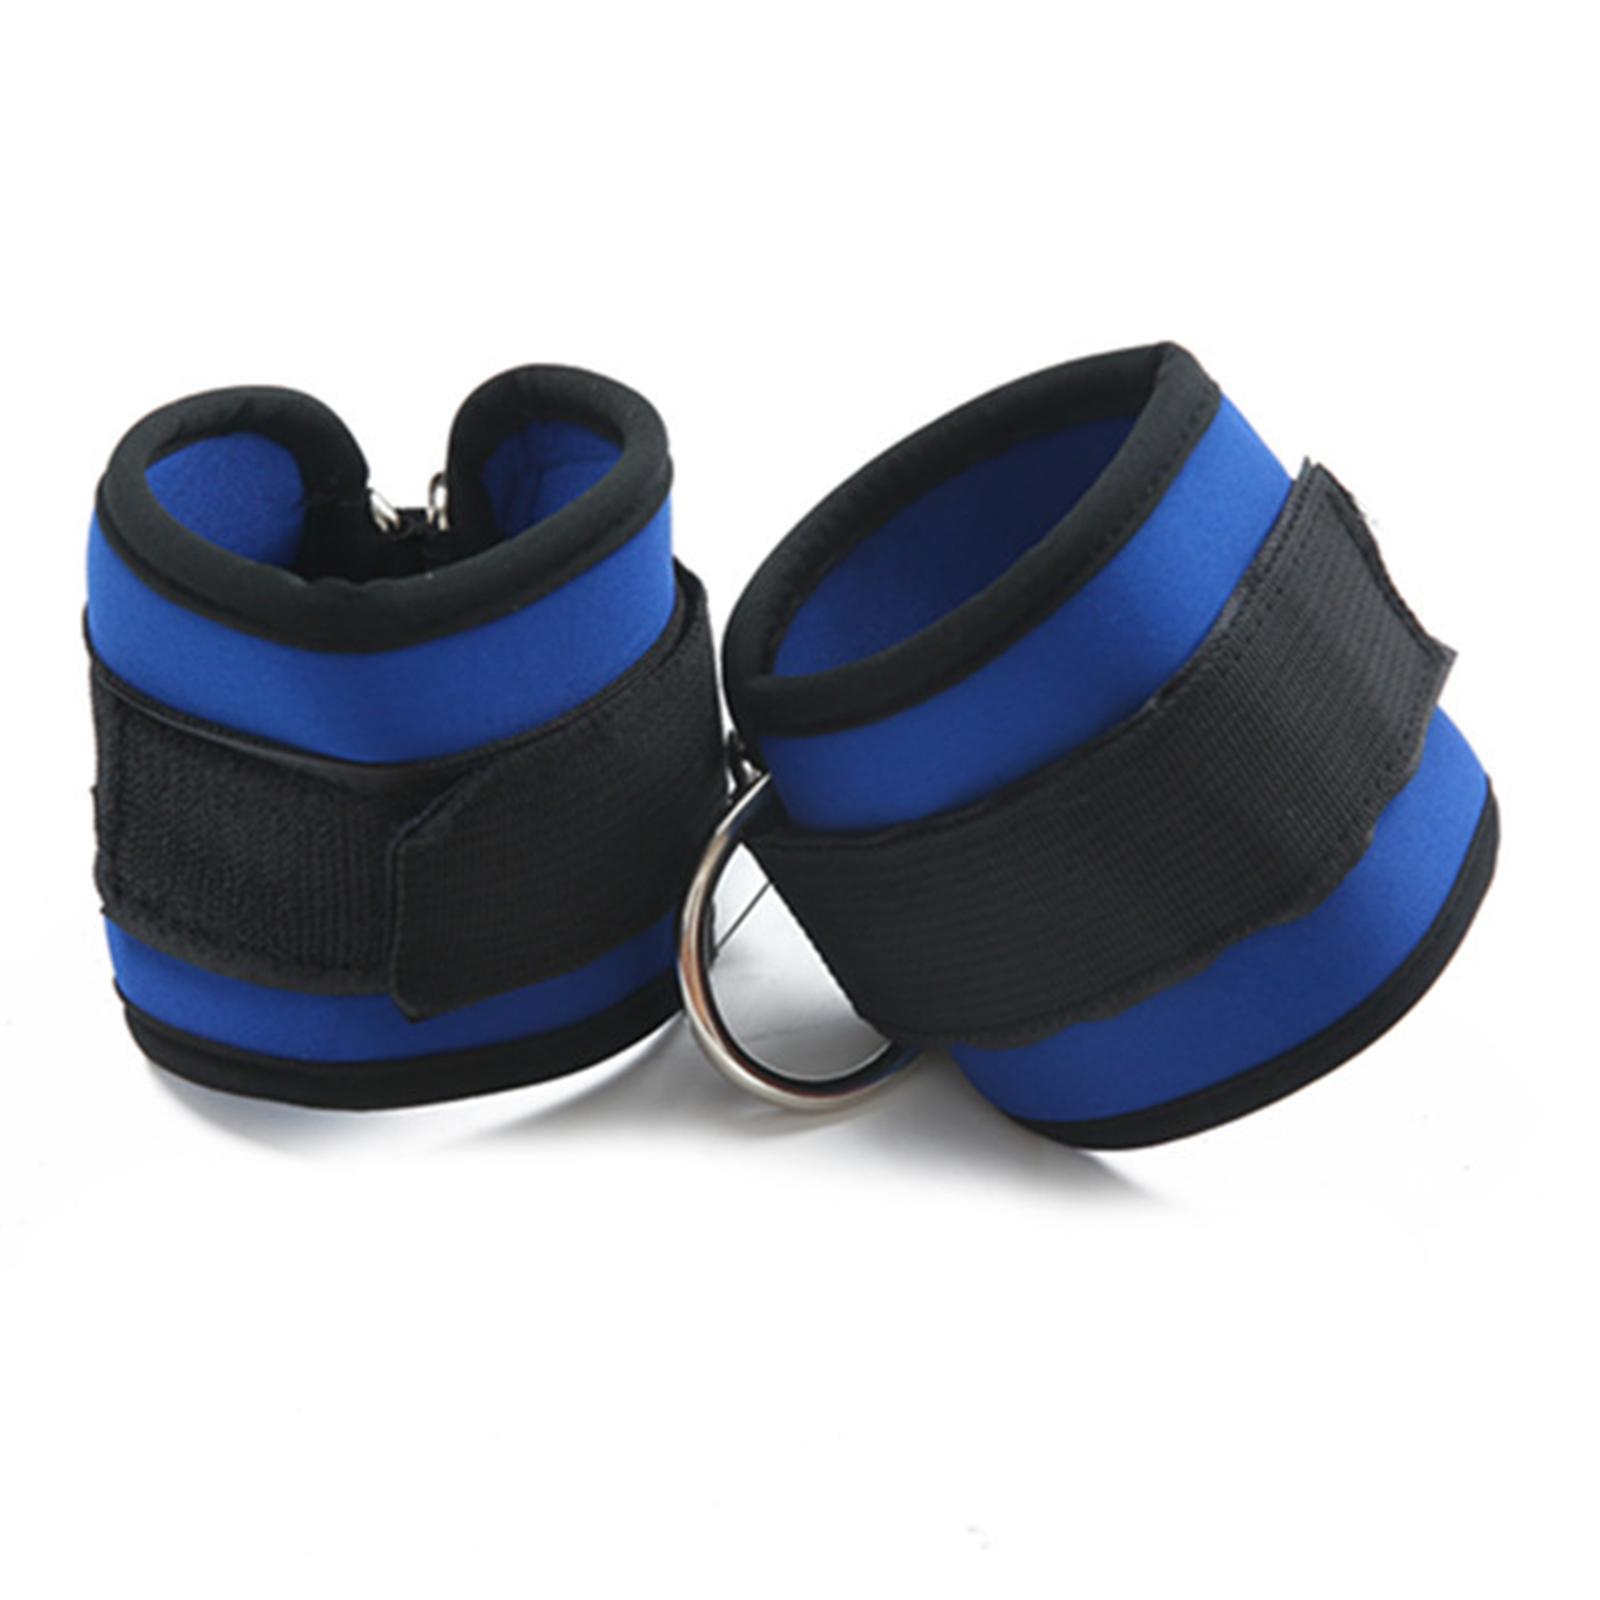 Ankle Strap Bands Exercise Leg Extensions Attachments for Gym Blue